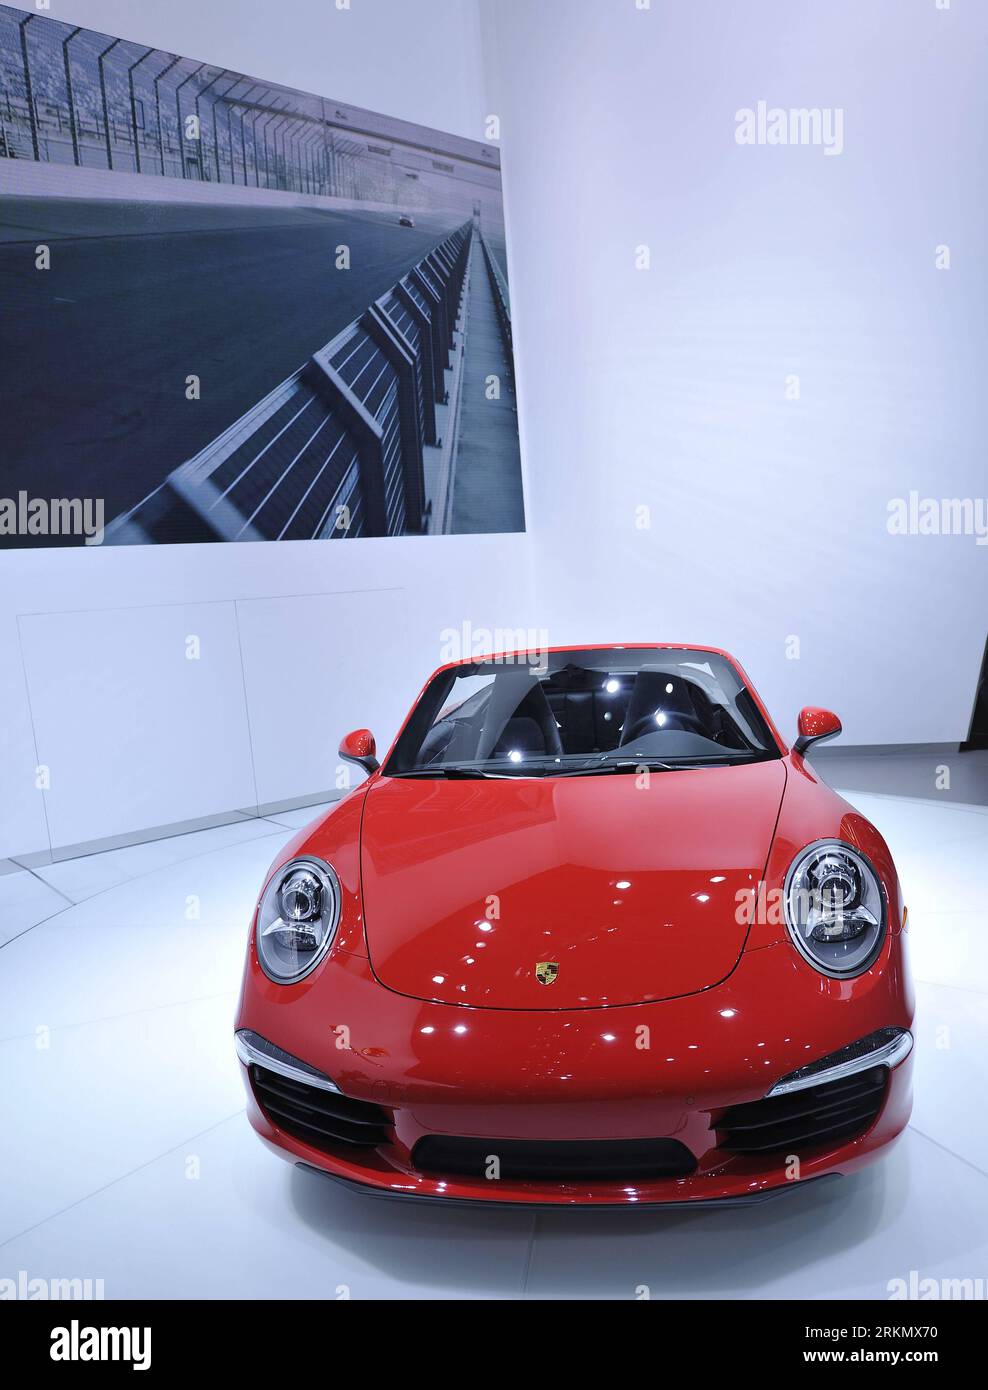 Bildnummer: 56849183  Datum: 09.01.2012  Copyright: imago/Xinhua (120110) -- DETROIT, Jan. 10, 2011 (Xinhua) -- Porsche 911 Carrera Cabriolet is introduced during a press preview of the North American International Auto Show (NAIAS) in Detroit, the United States, Jan. 9, 2011. (Xinhua/Zhang Jun) US-DETROIT-AUTO-SHOW PUBLICATIONxNOTxINxCHN Wirtschaft Messe Automesse Autoindustrie Auto premiumd xbs x0x 2012 hoch      56849183 Date 09 01 2012 Copyright Imago XINHUA  Detroit Jan 10 2011 XINHUA Porsche 911 Carrera Convertible IS introduced during a Press Preview of The North American International Stock Photo